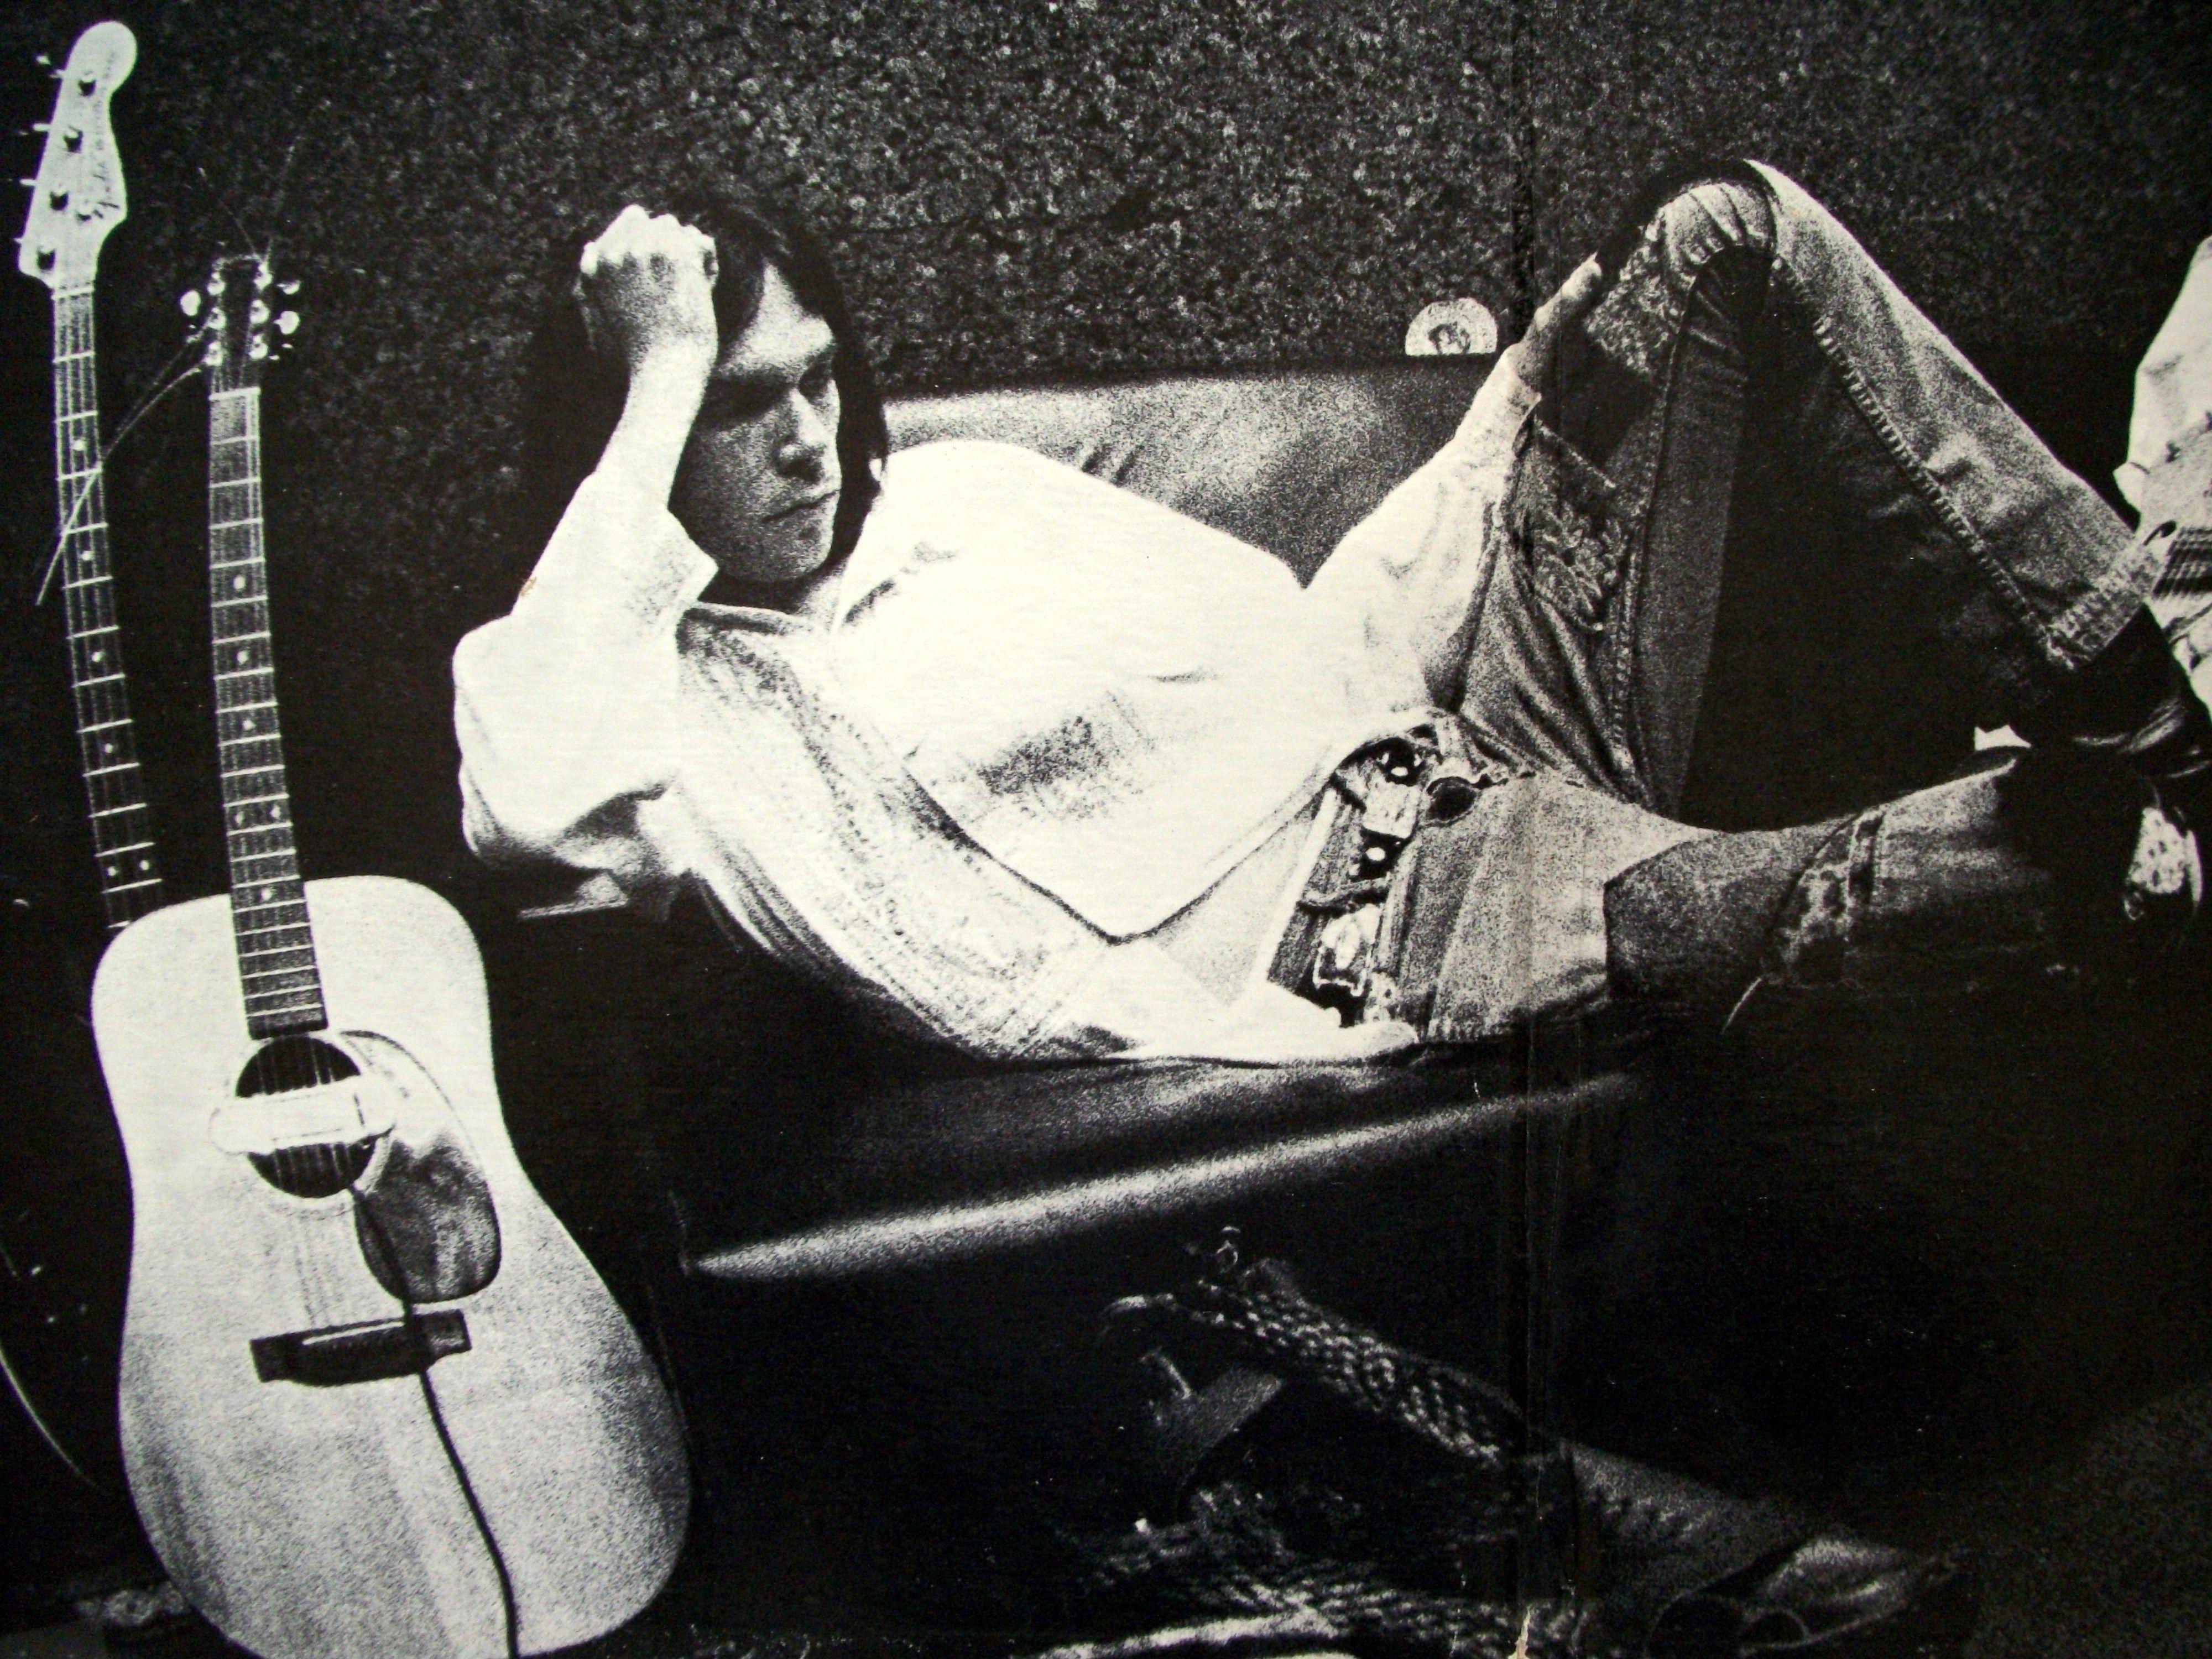 High Resolution Wallpaper = neil young picture, 3130 kB